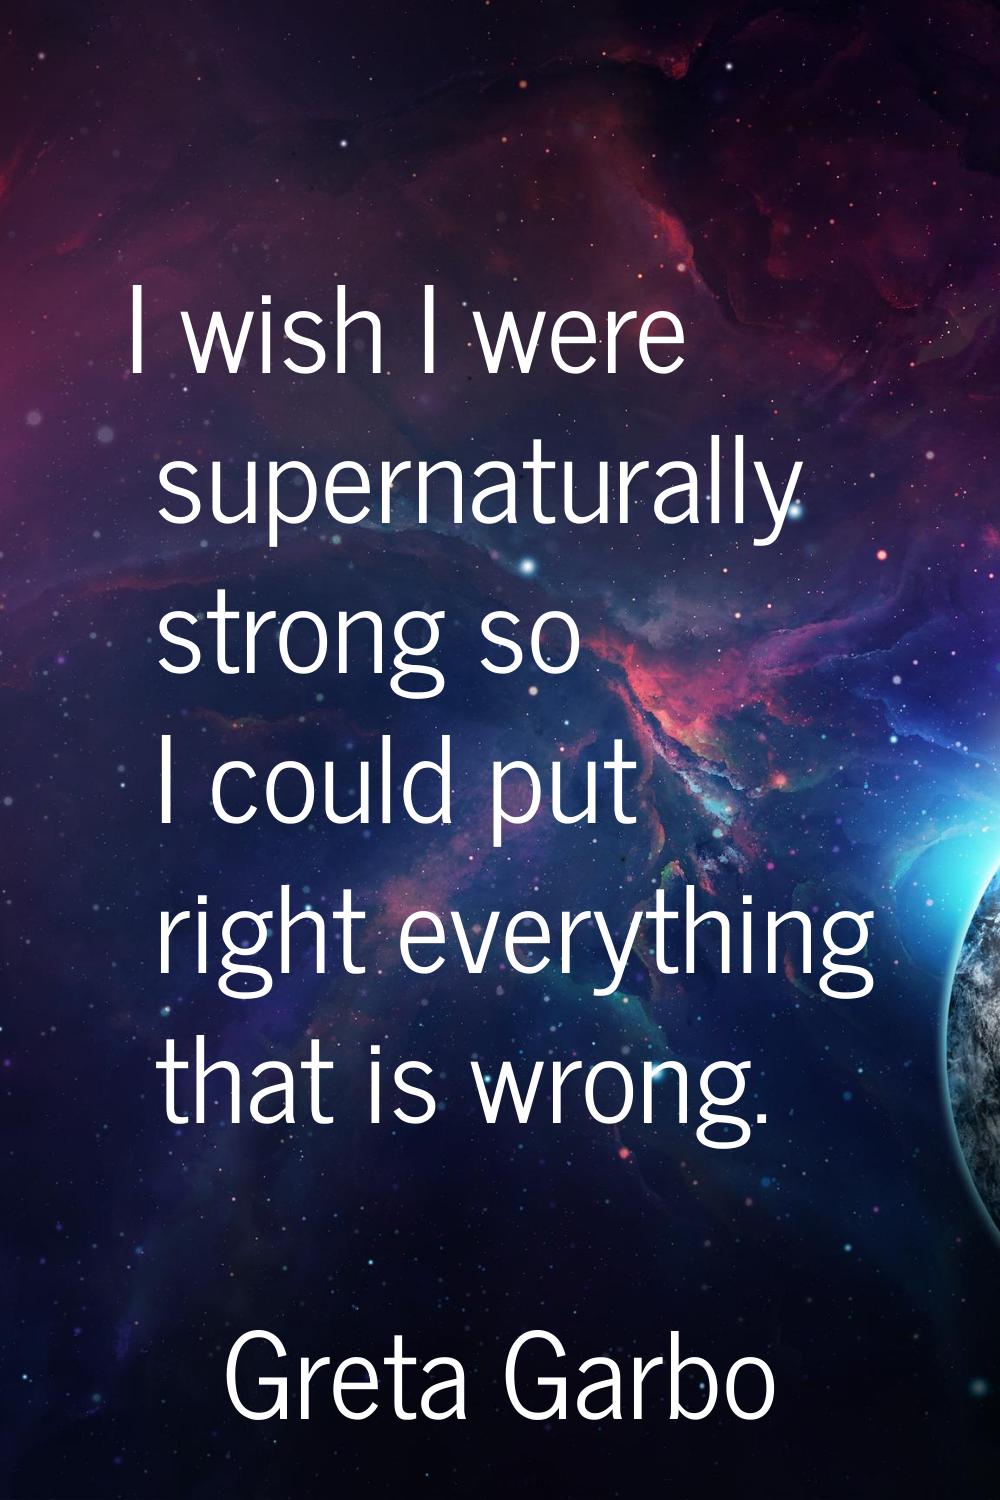 I wish I were supernaturally strong so I could put right everything that is wrong.